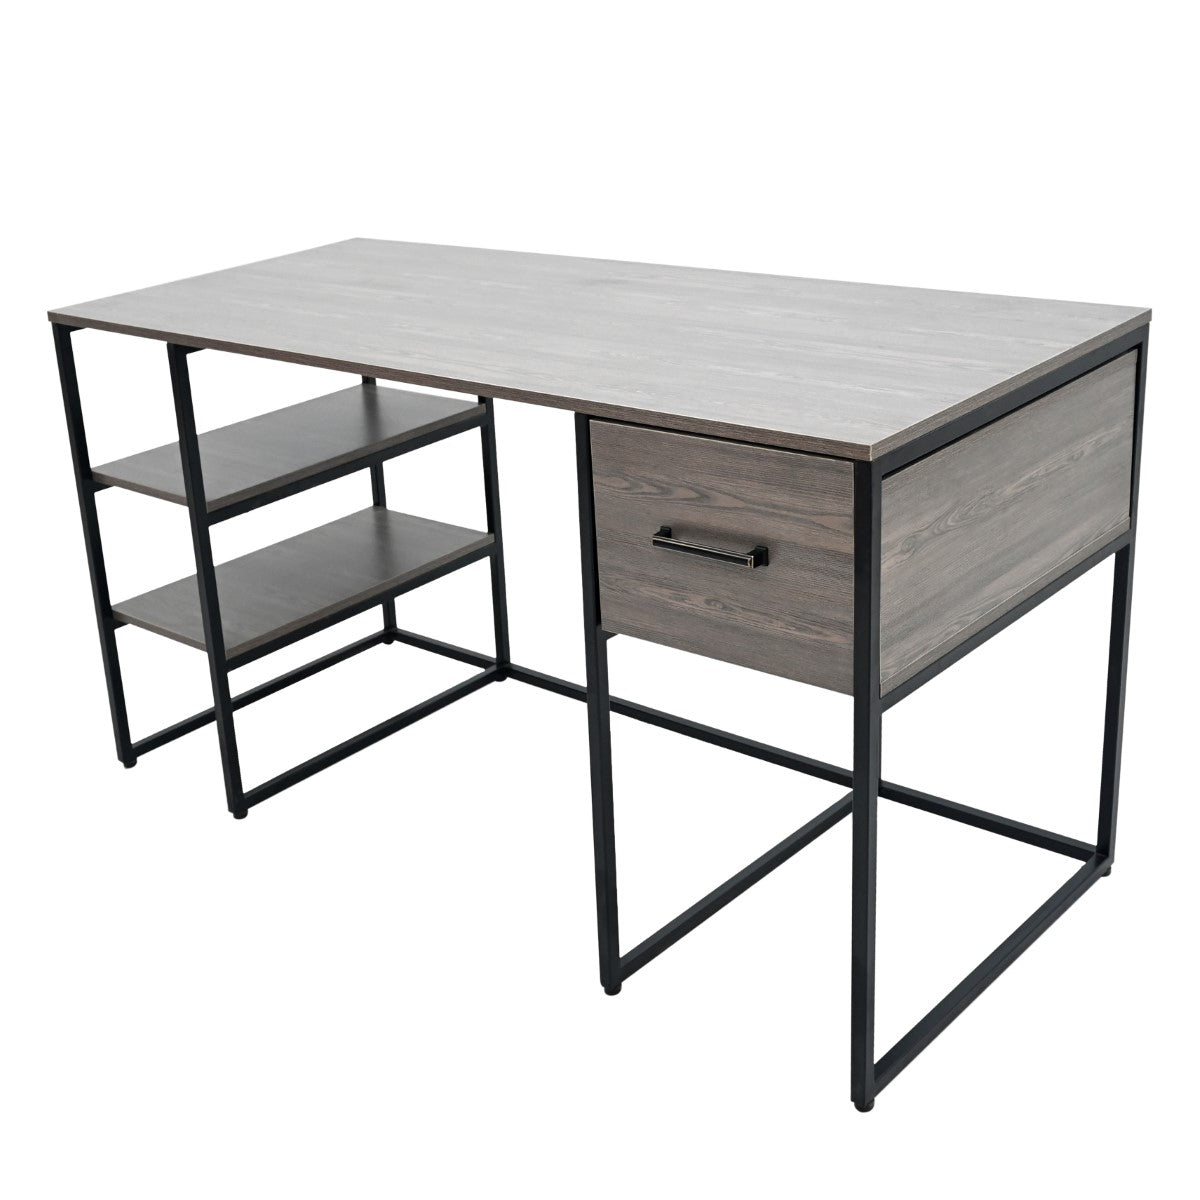 Kent series One Study table